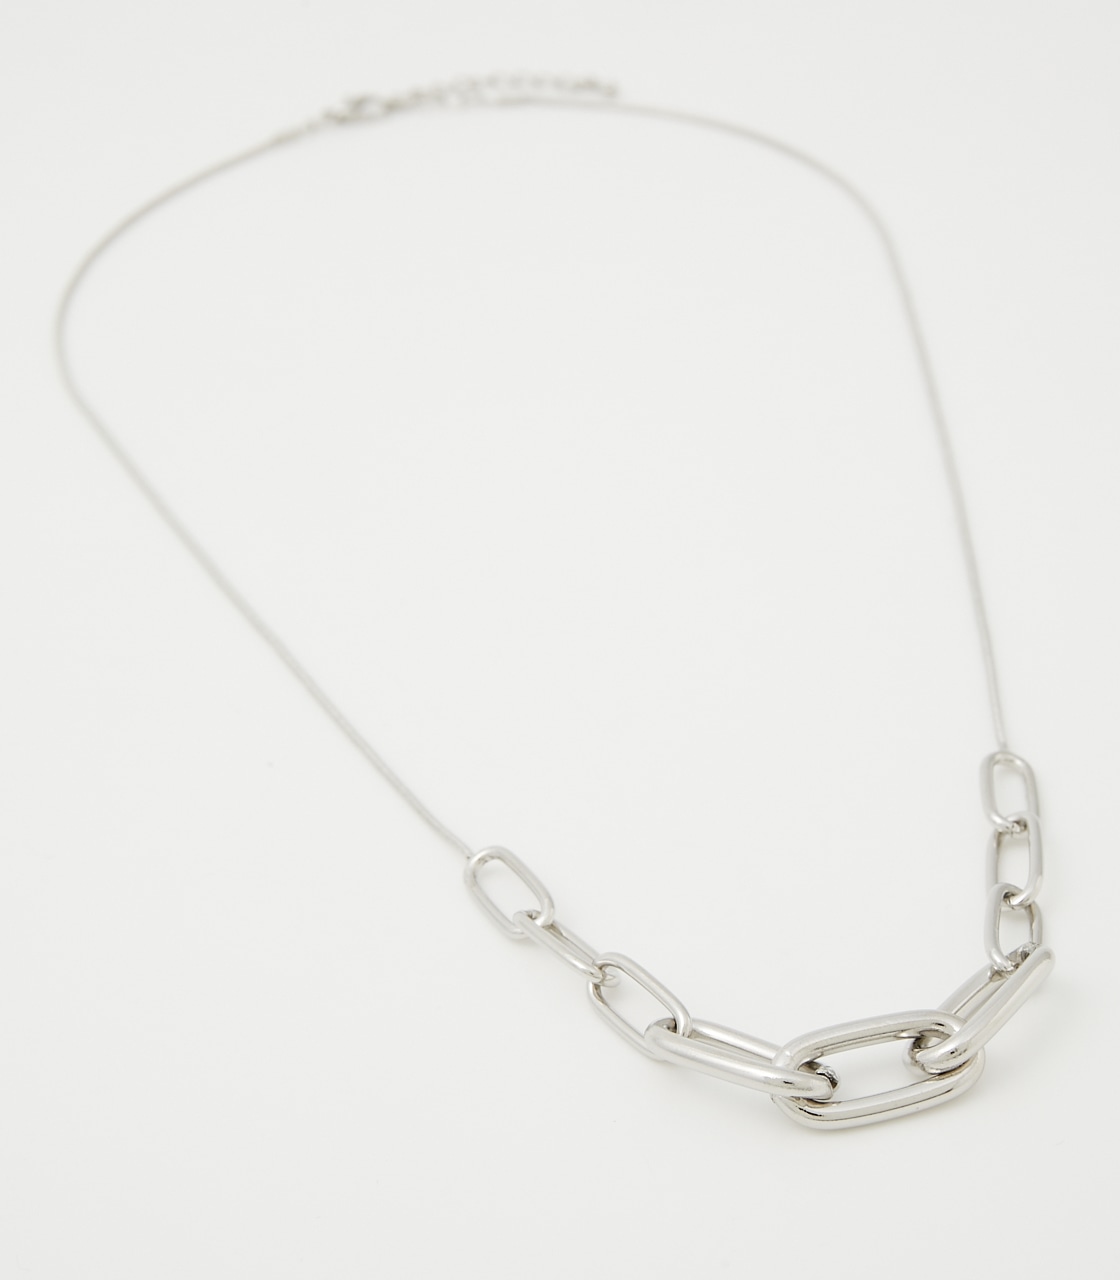 SYMMETRY CHAIN NECKLACE/シンメトリーチェーンネックレス 詳細画像 SLV 2